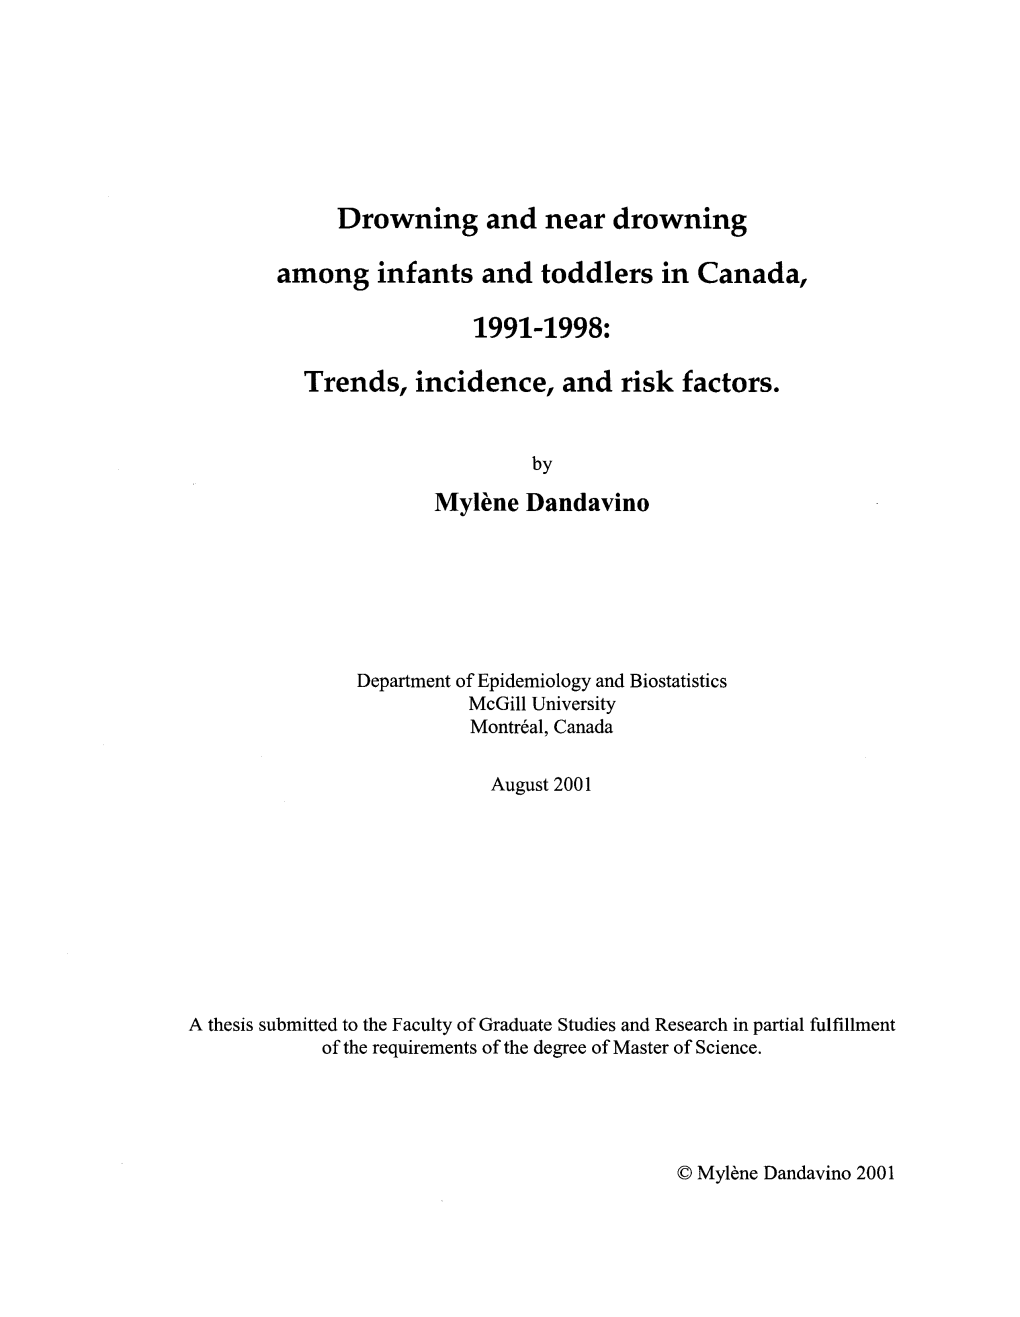 Drowning and Near Drowning Among Infants and Toddlers in Canada, 1991-1998: Trends, Incidence, and Risk Factors